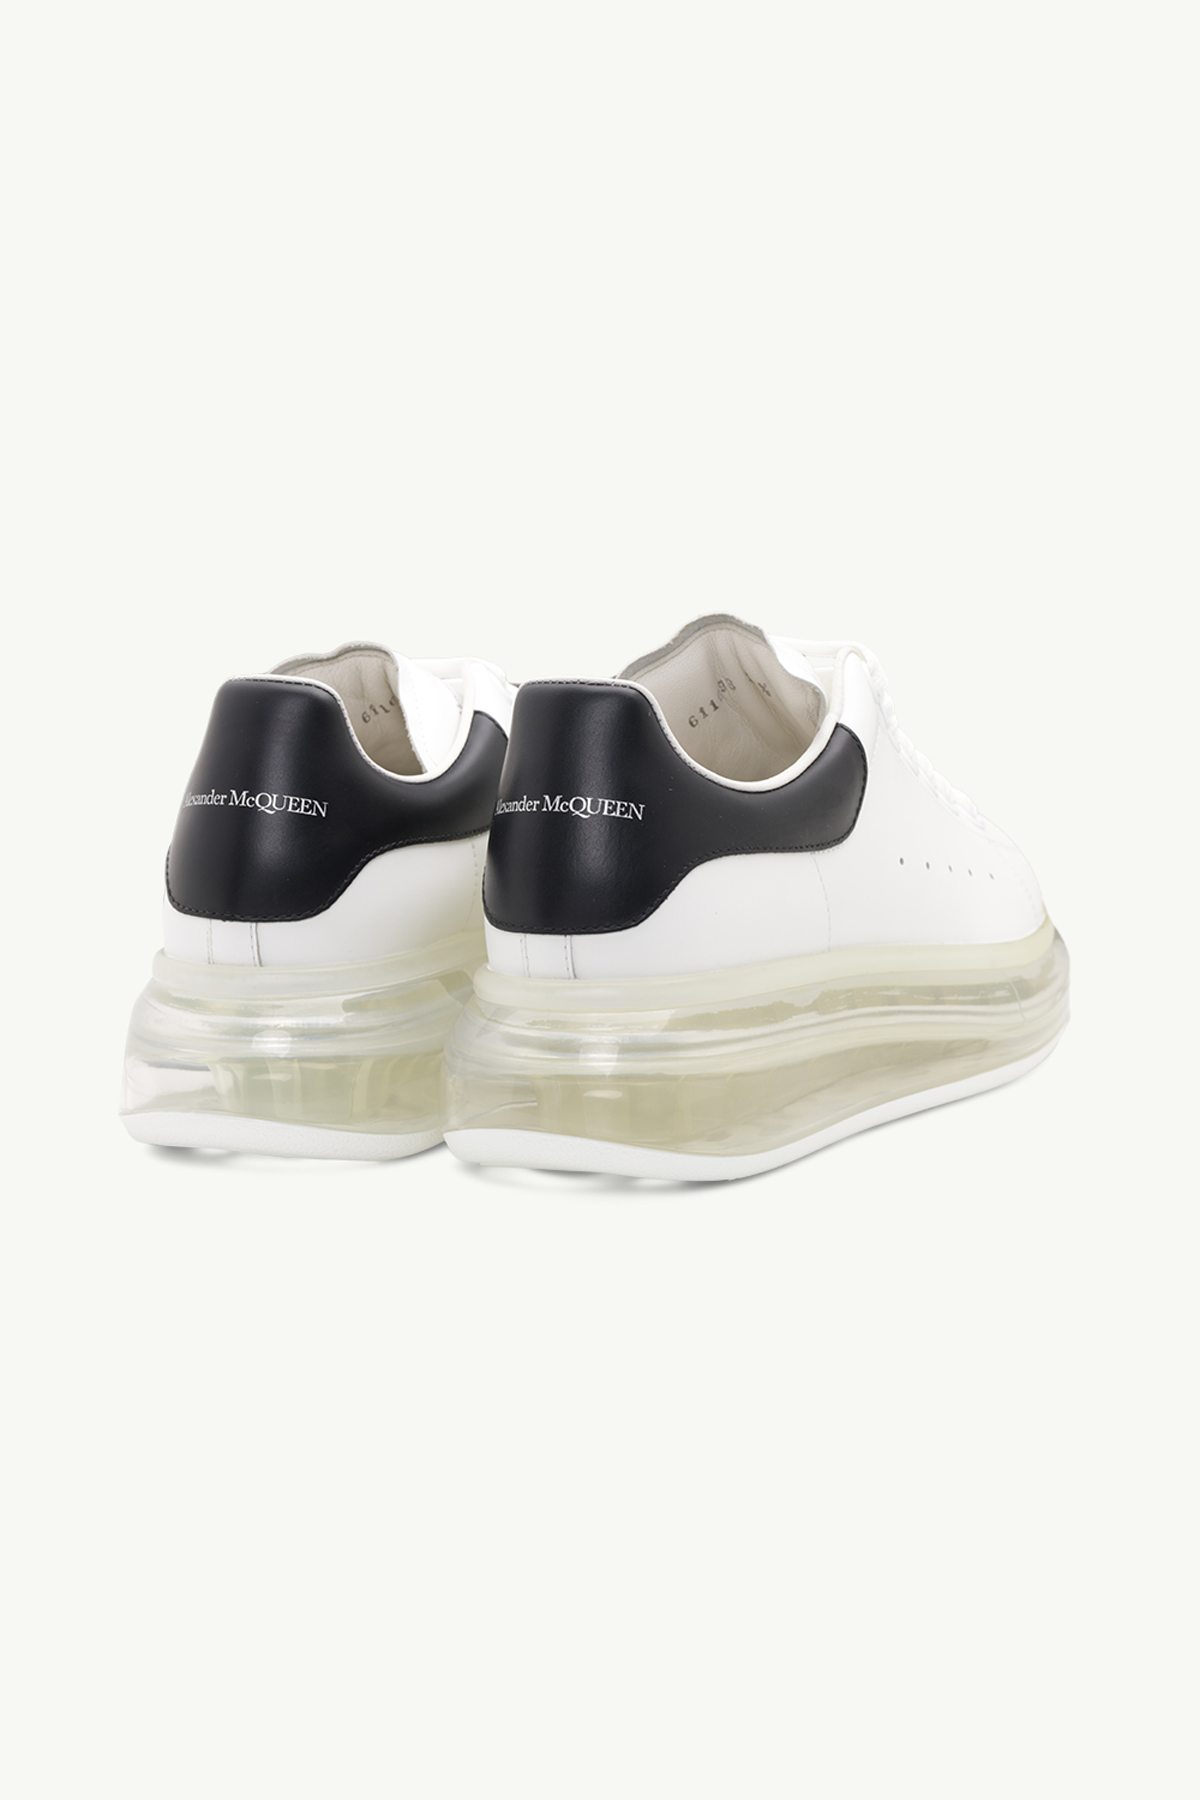 ALEXANDER MCQUEEN Women Transparent Oversized Lace-up Sneakers in White/Black Smooth Leather 2